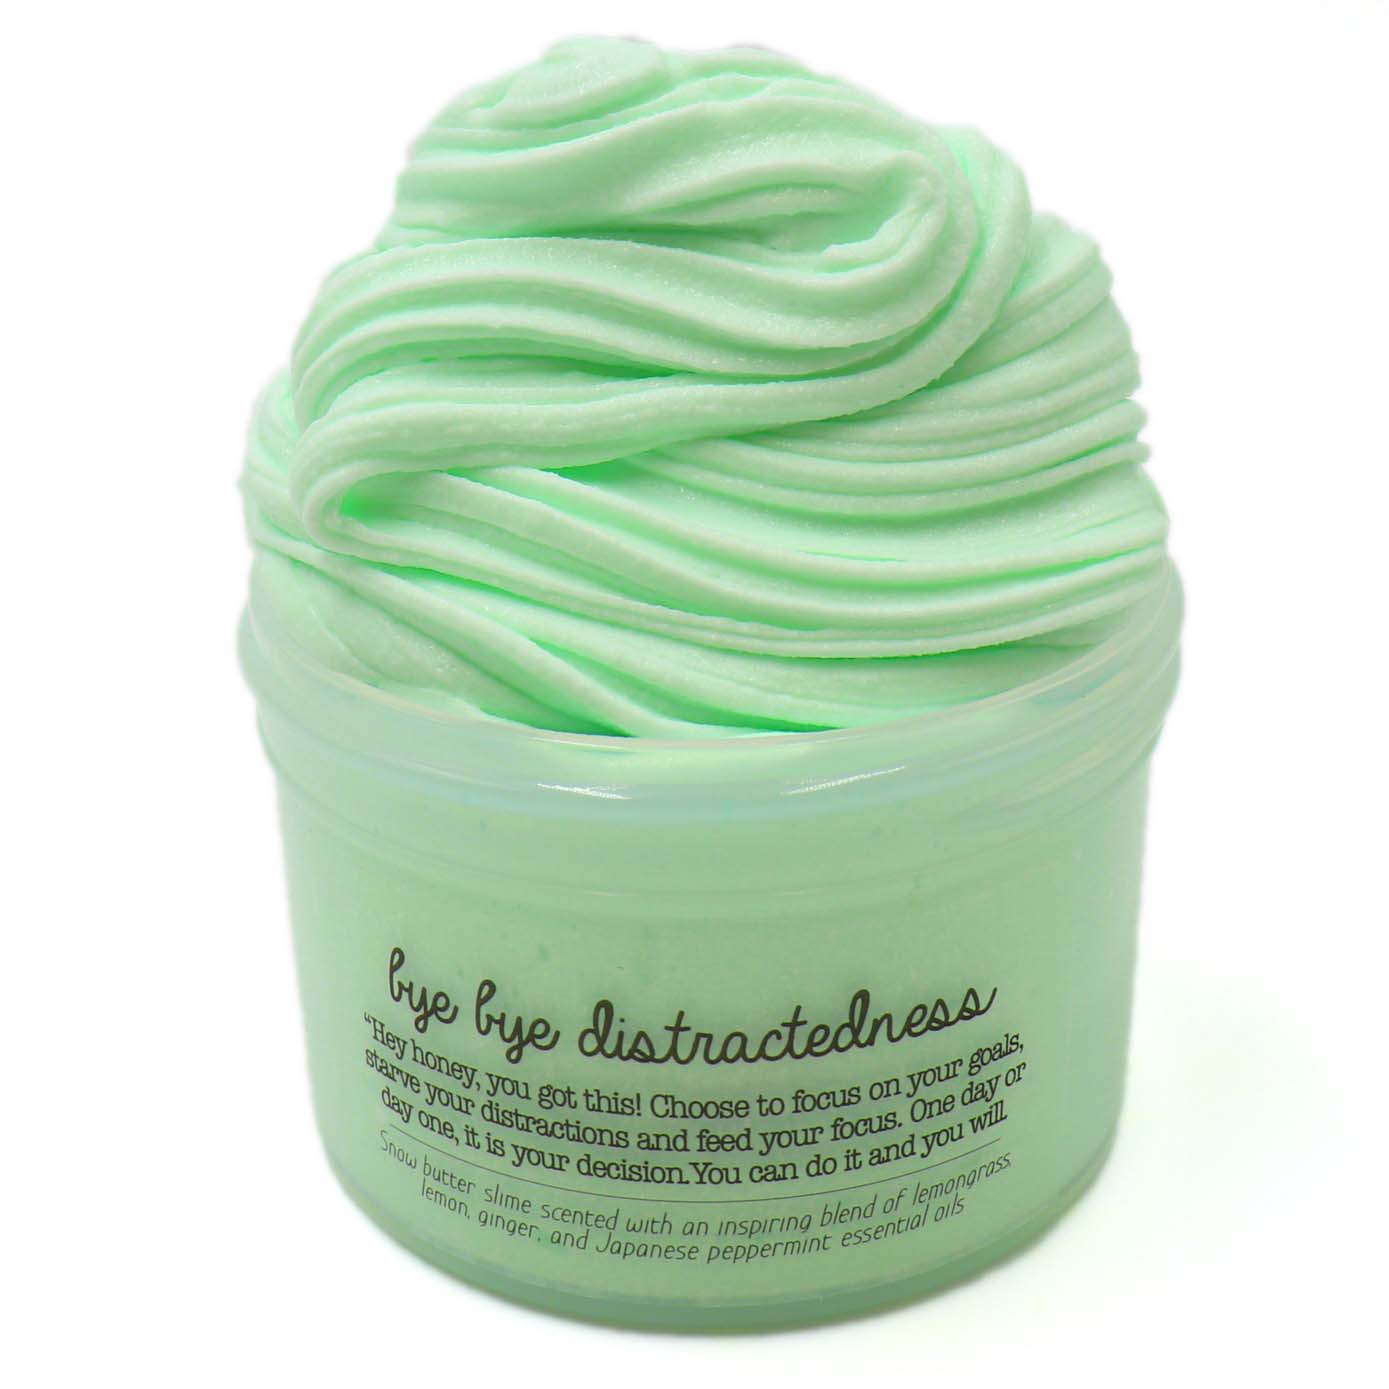 Bye Bye Distractedness Focus Green Anxiety Relief Toy Tool Stress Sensory Therapy Dough Aromatherapy Essential Oil Scented Slime Fantasies Shop 7oz Front View